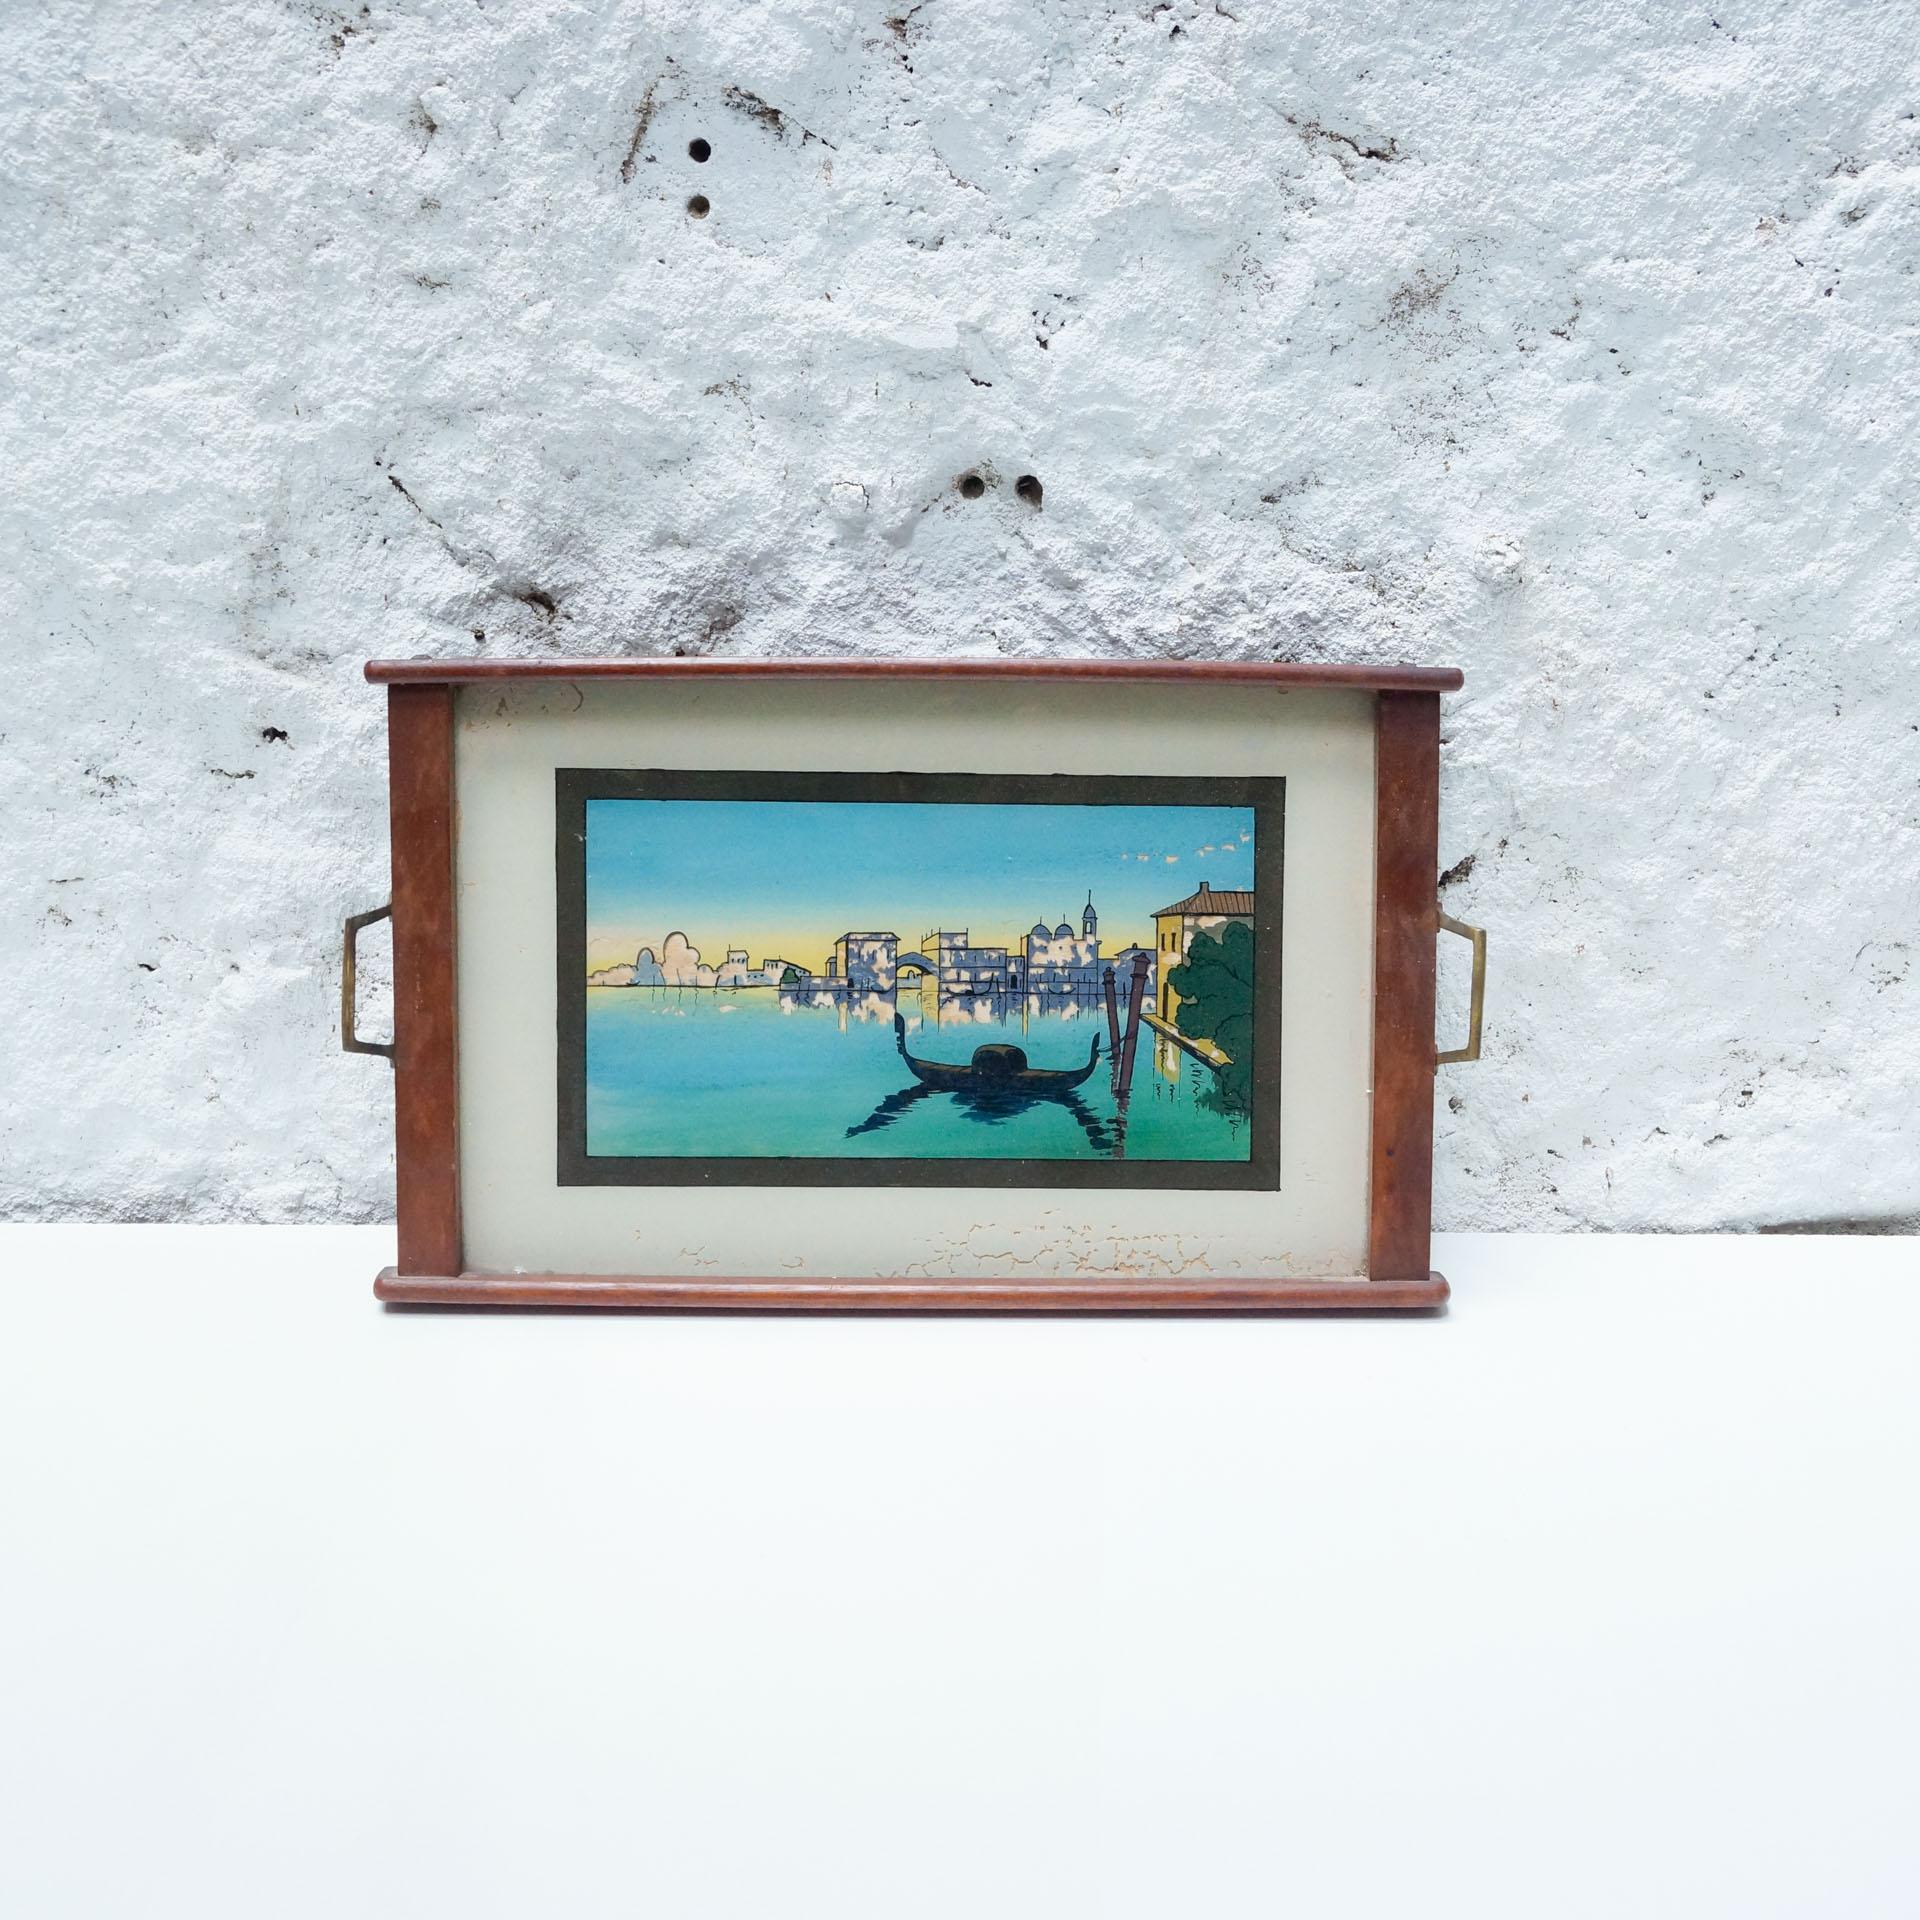 Mid-Century Modern Antique Glass and Wood Tray with Venice Landscape, circa 1930